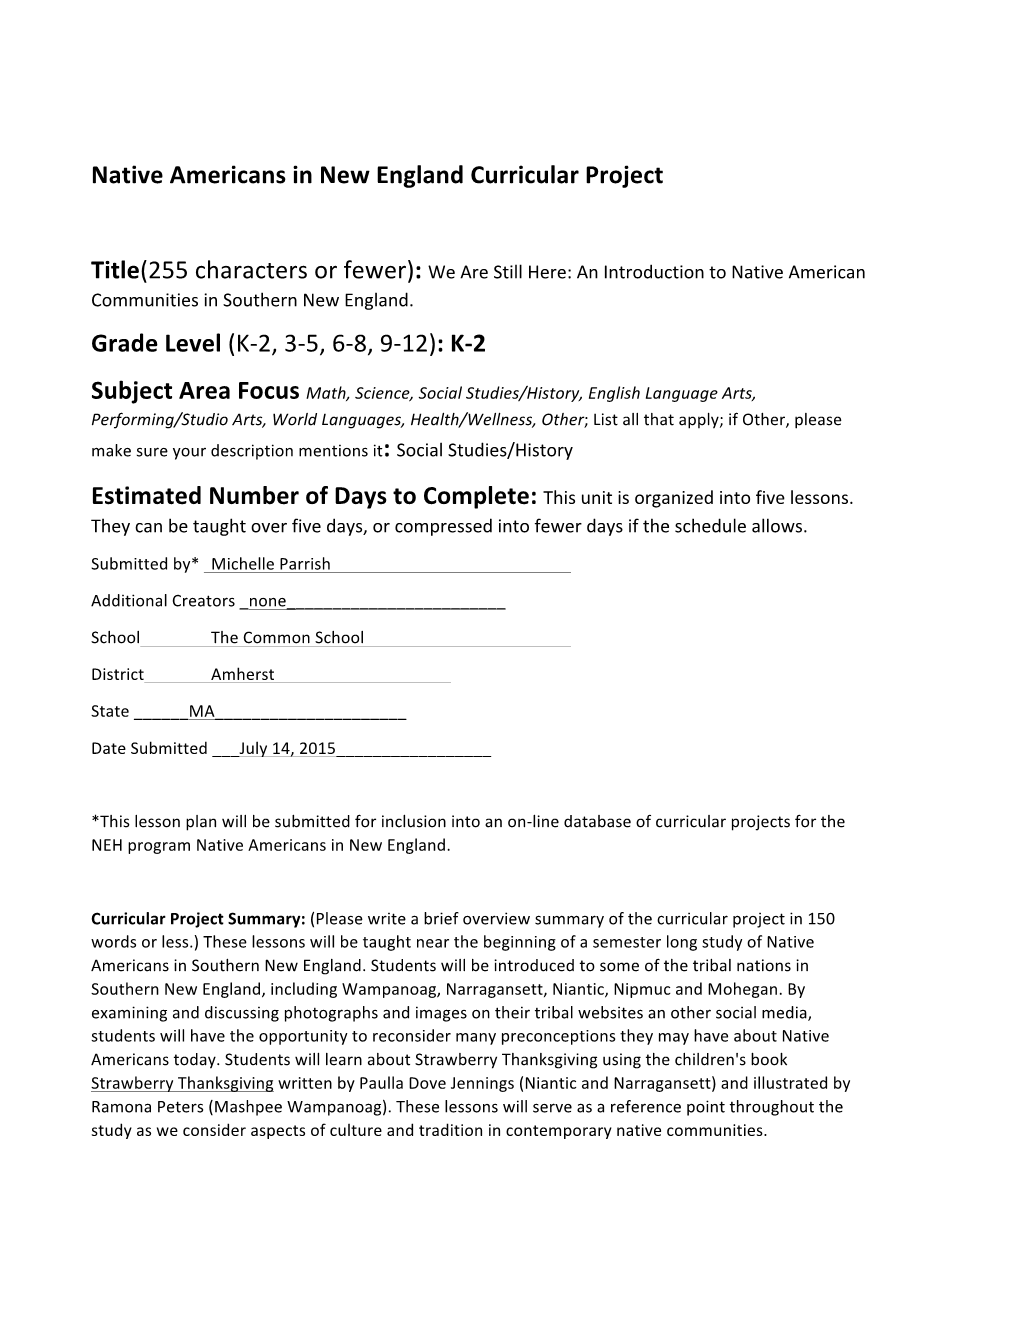 Native Americans in New England Curricular Project